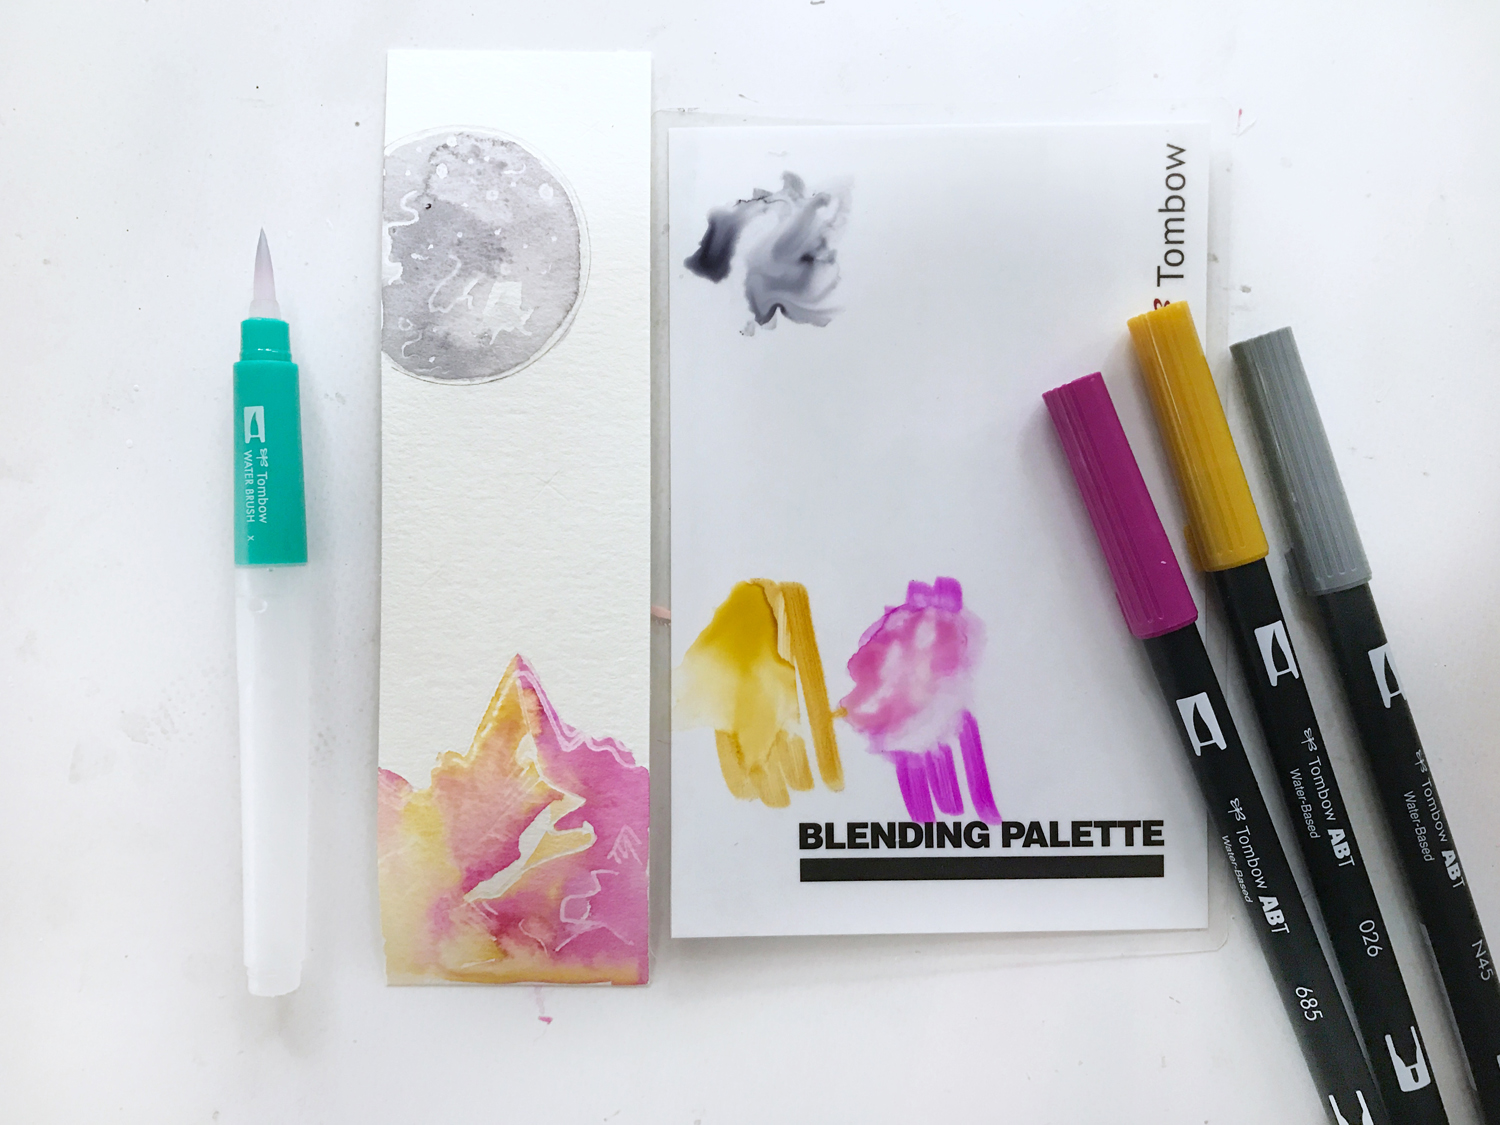 Learn how to create some Bohemian Watercolor Galaxy Bookmarks using this tutorial by @studiokatie and Bohemian Dual Brush Pens from @tombowusa #tombowusa #tombow #bookmarks